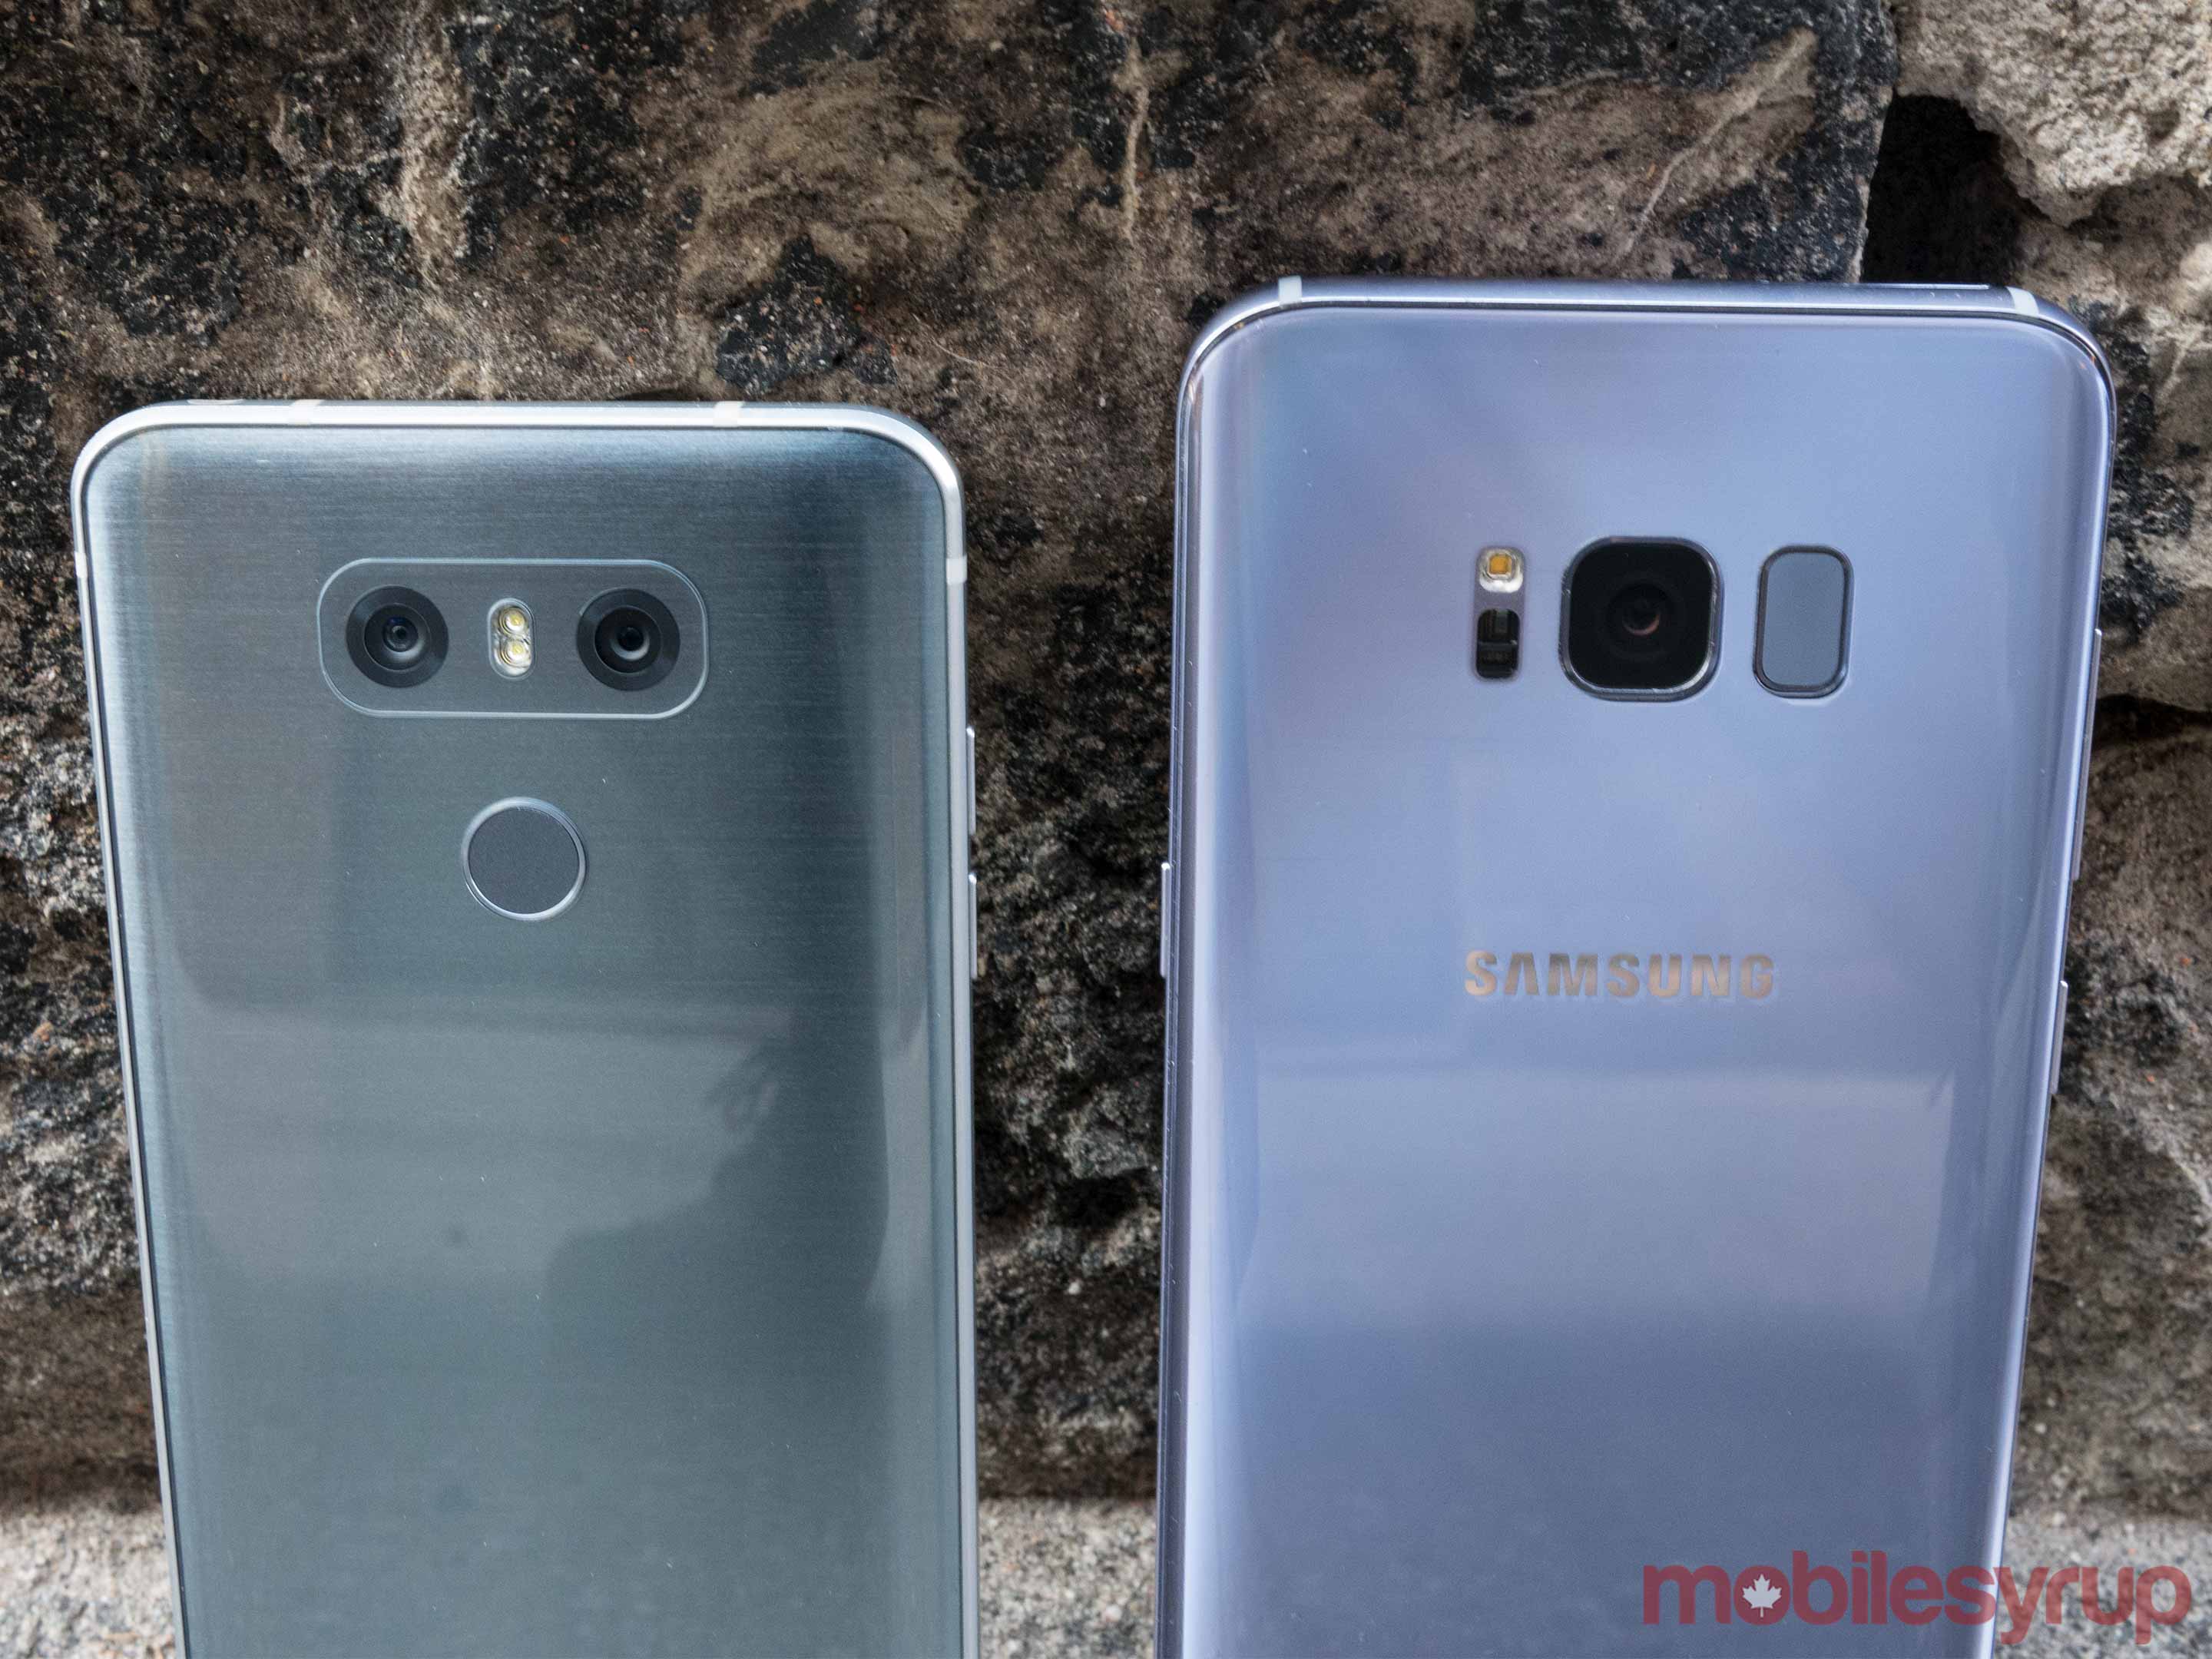 Galaxy S8+ and G6 backs